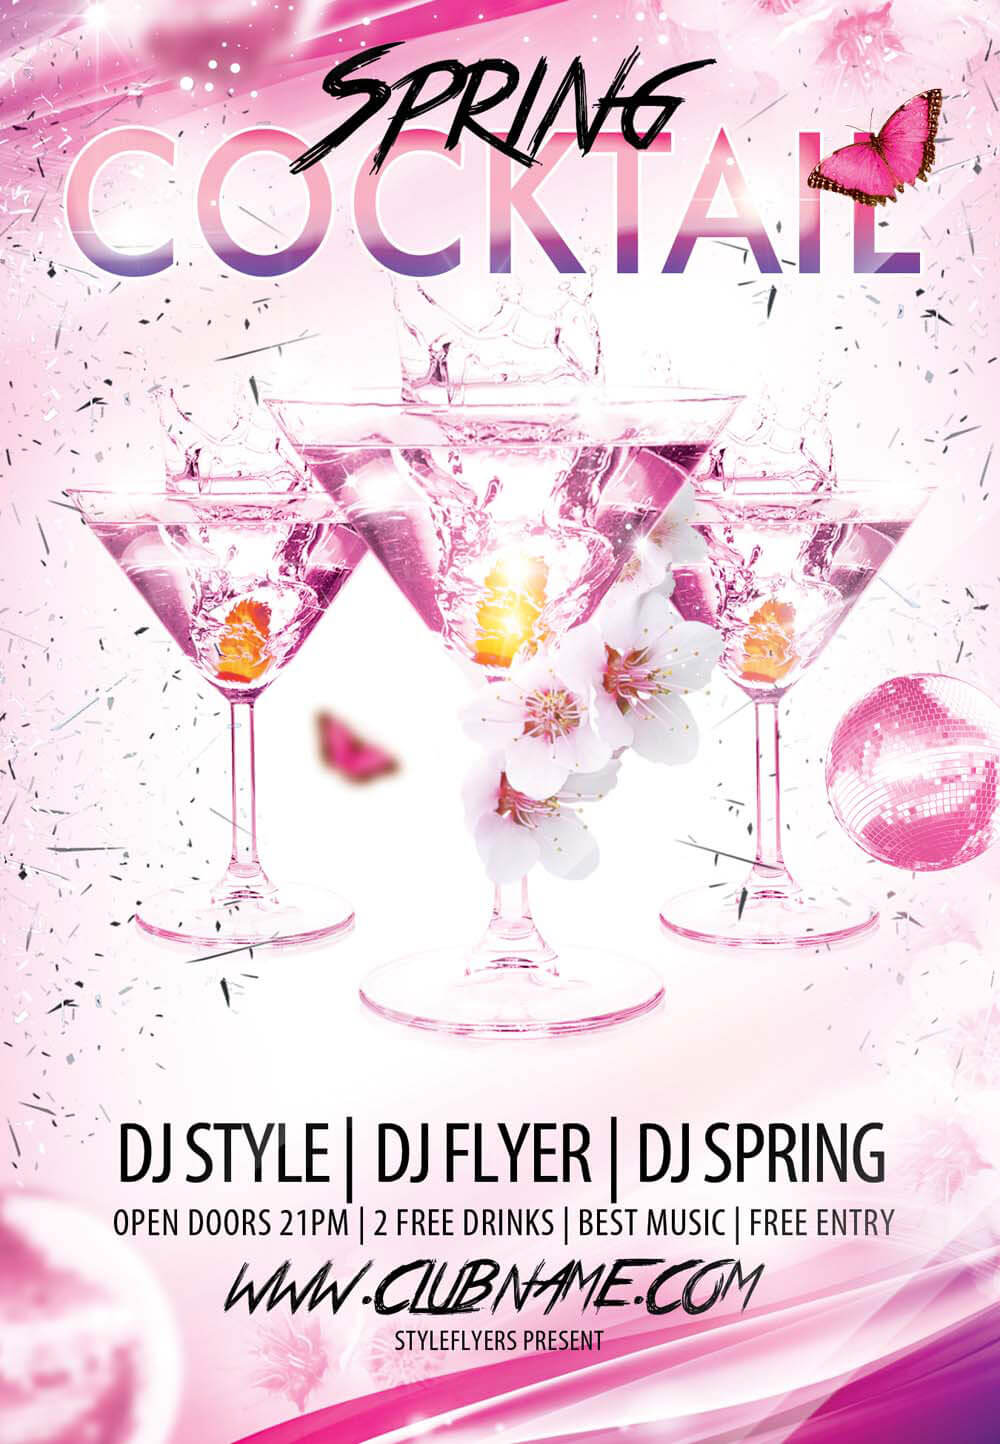 Cocktail Spring PSD Flyer Template